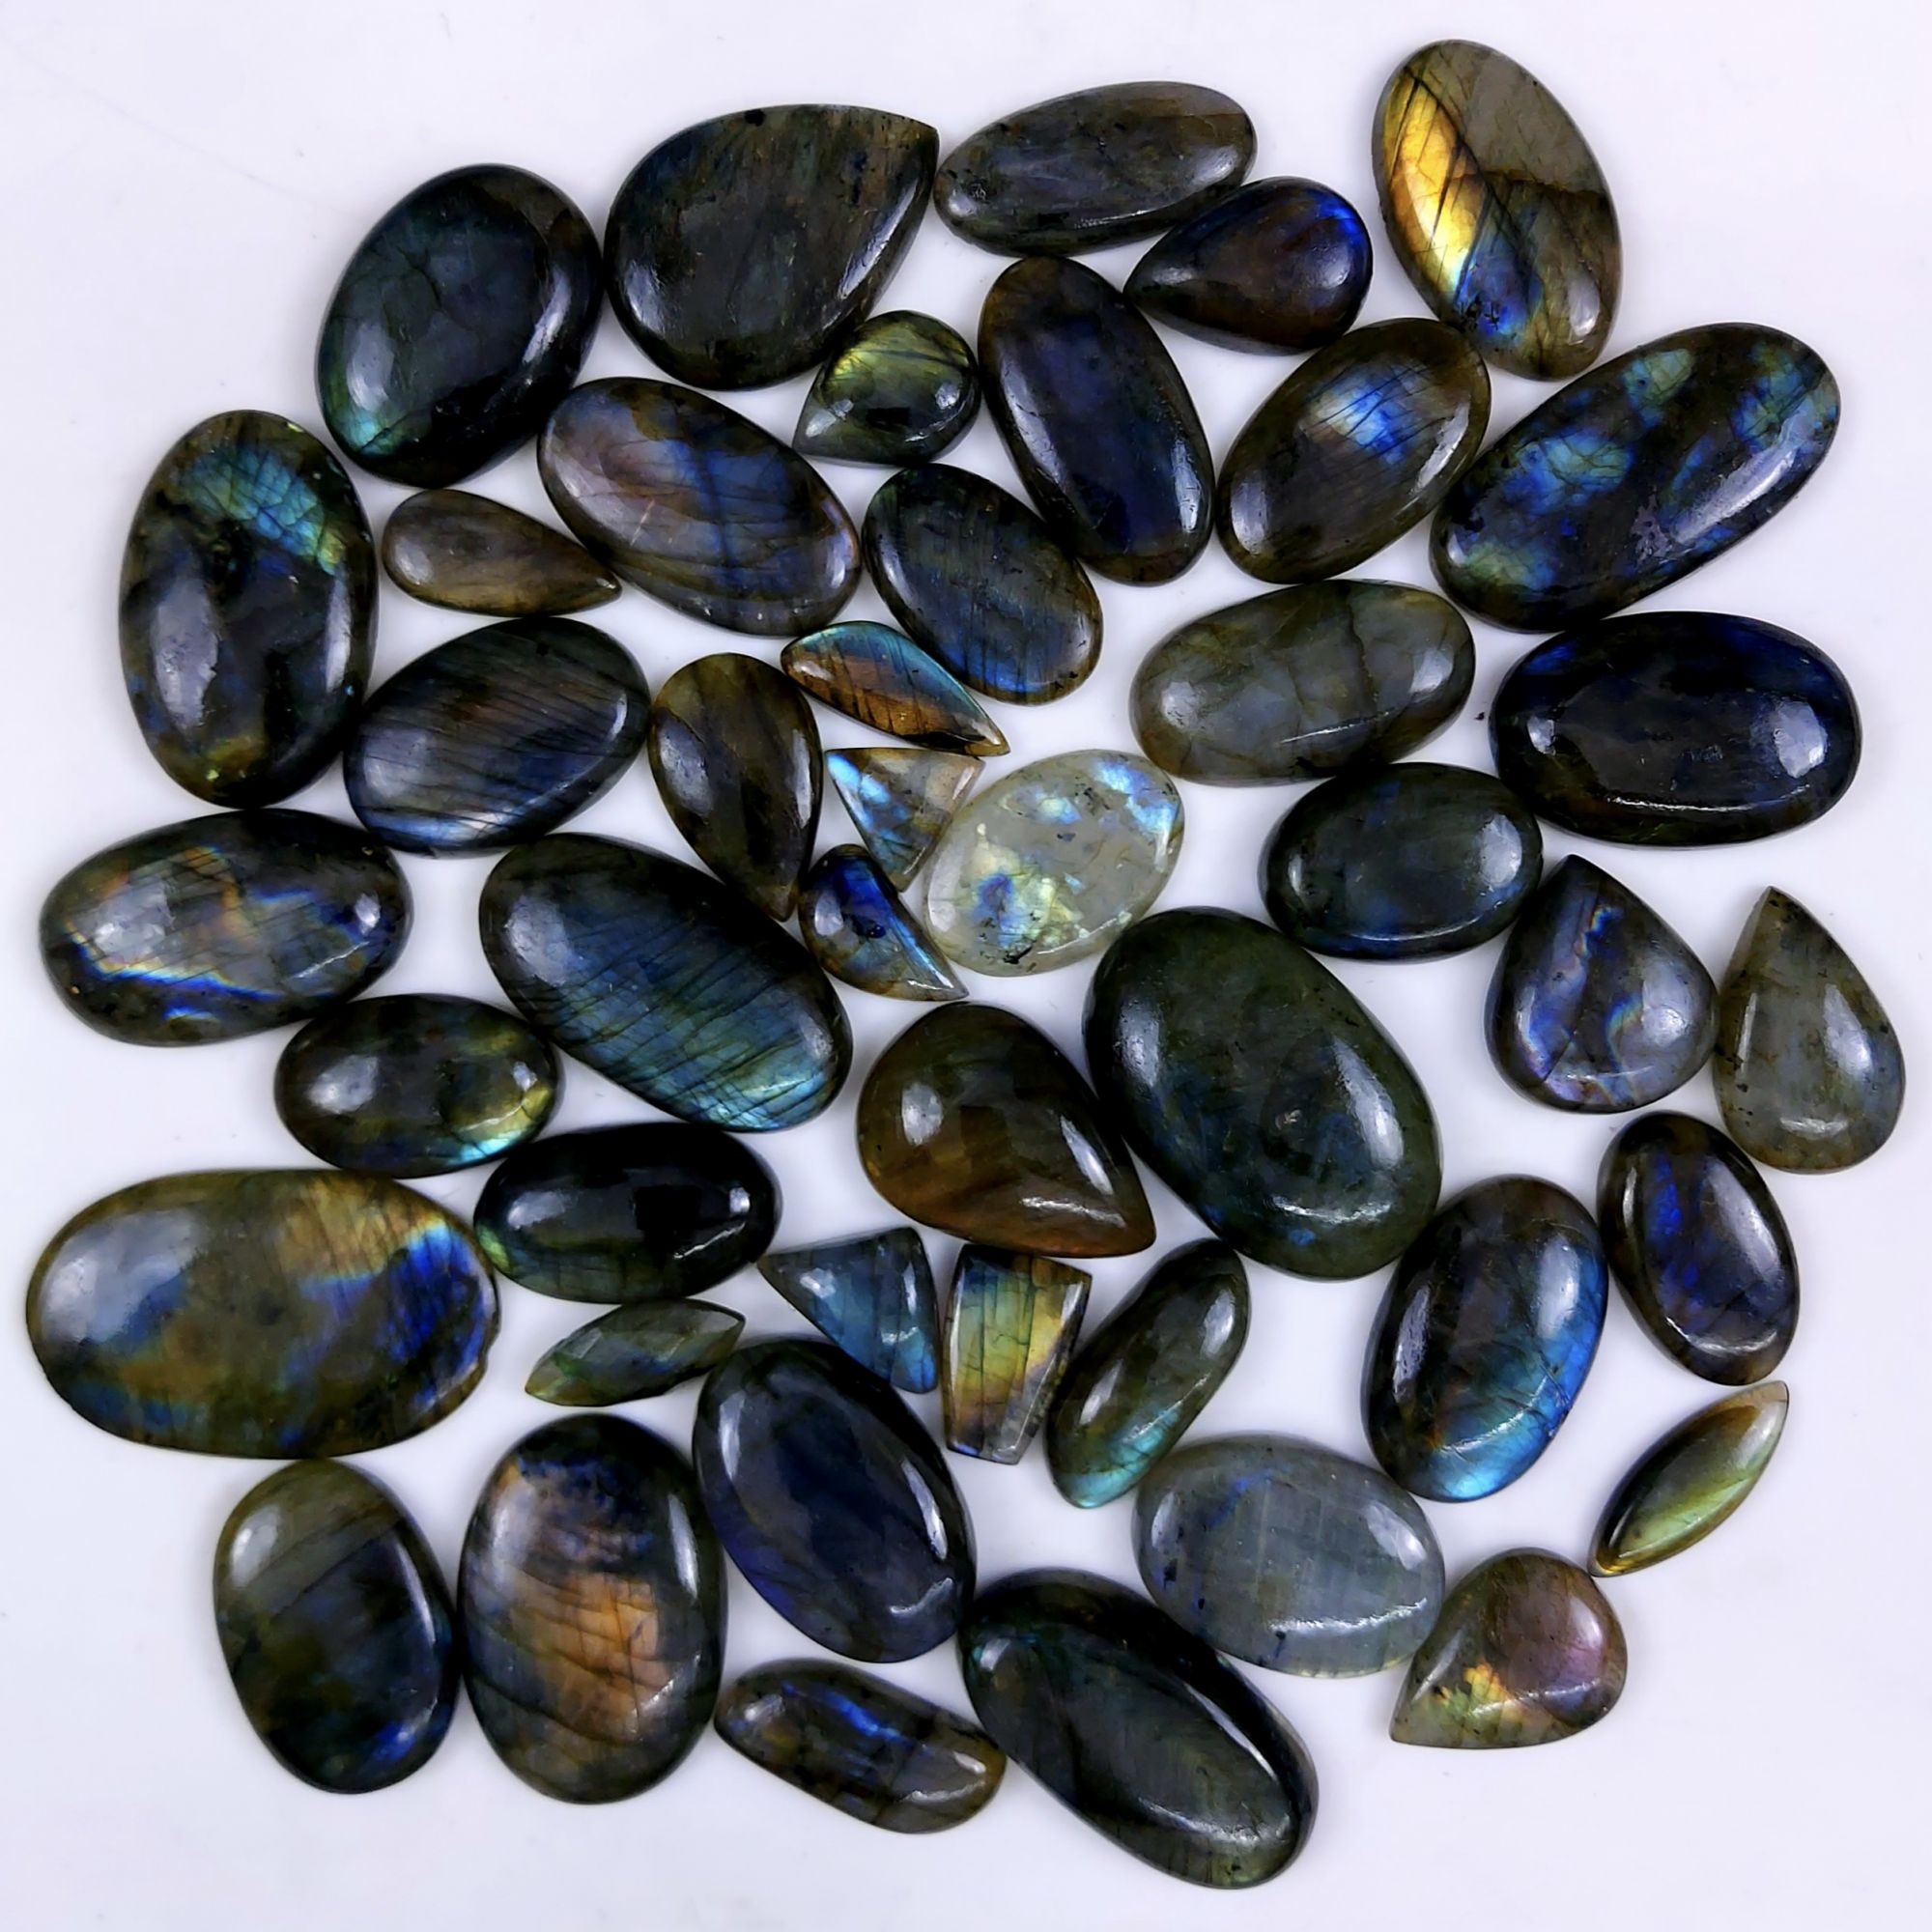 44pc 1606Cts Labradorite Cabochon Multifire Healing Crystal For Jewelry Supplies, Labradorite Necklace Handmade Wire Wrapped Gemstone Pendant 40x25 15x14mm#6361